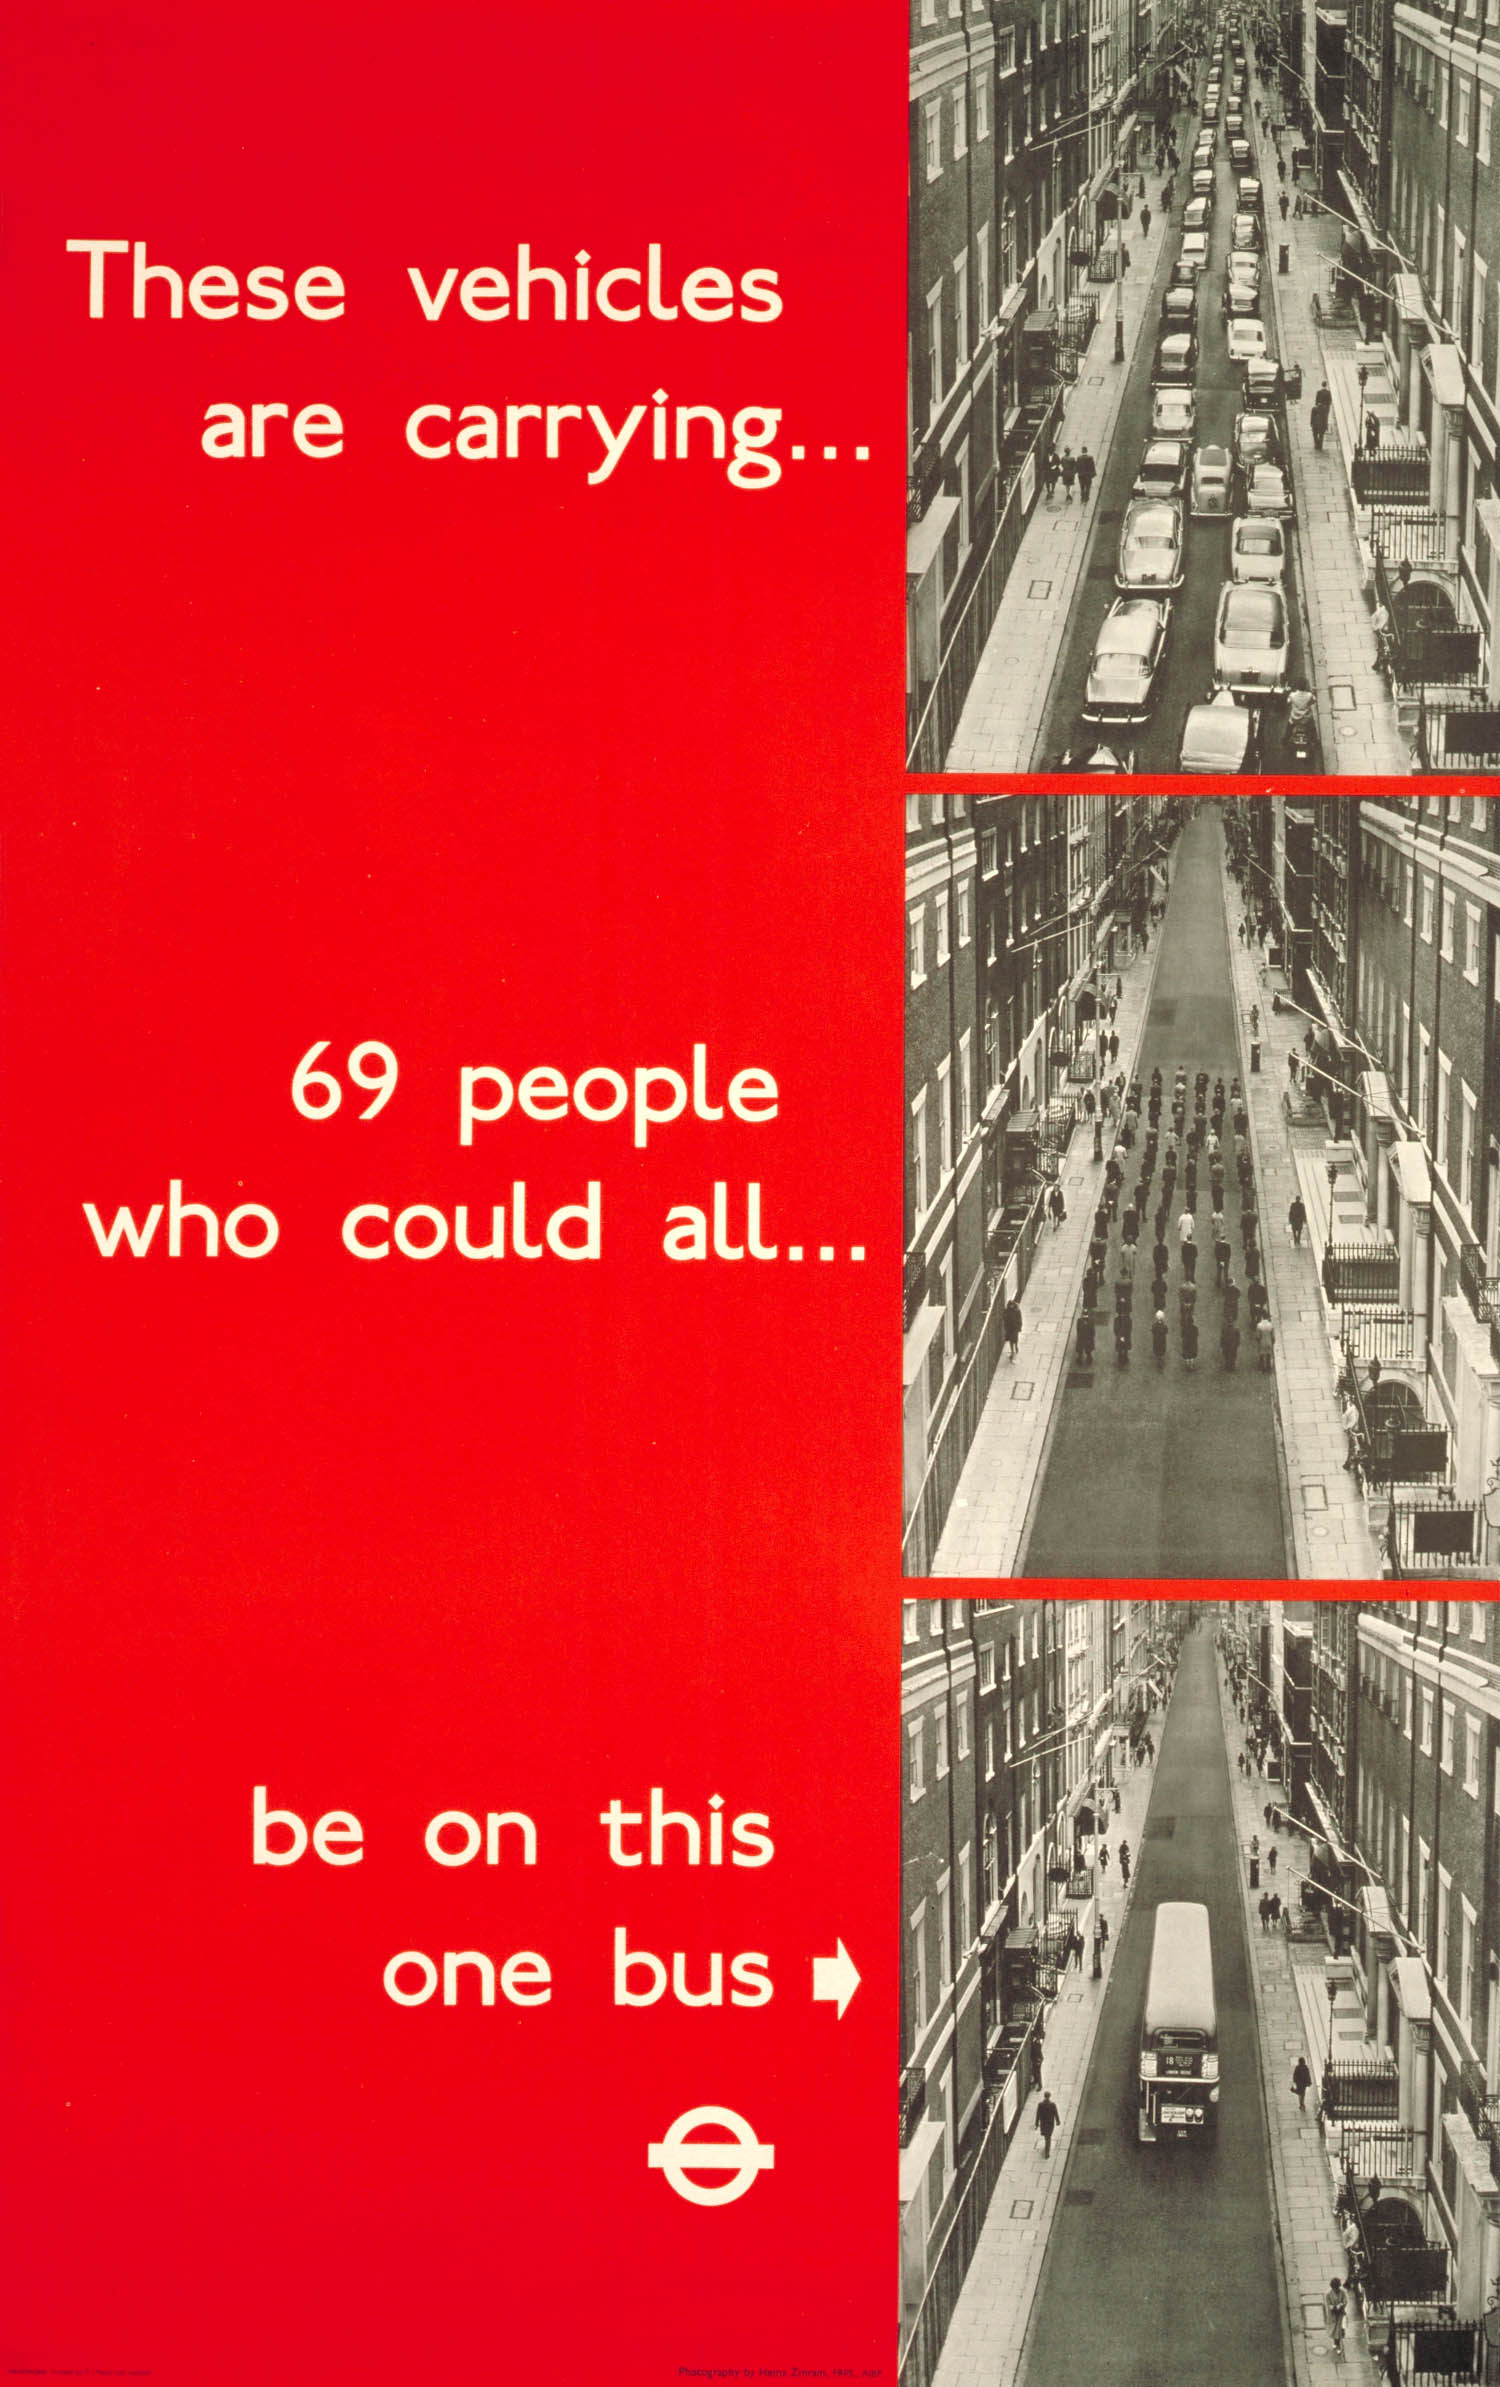 3 photos showing 69 people in cars, on foot and in one bus. The text next to the photos says 'These vehicles are carrying... 69 people who could all... be on this one bus